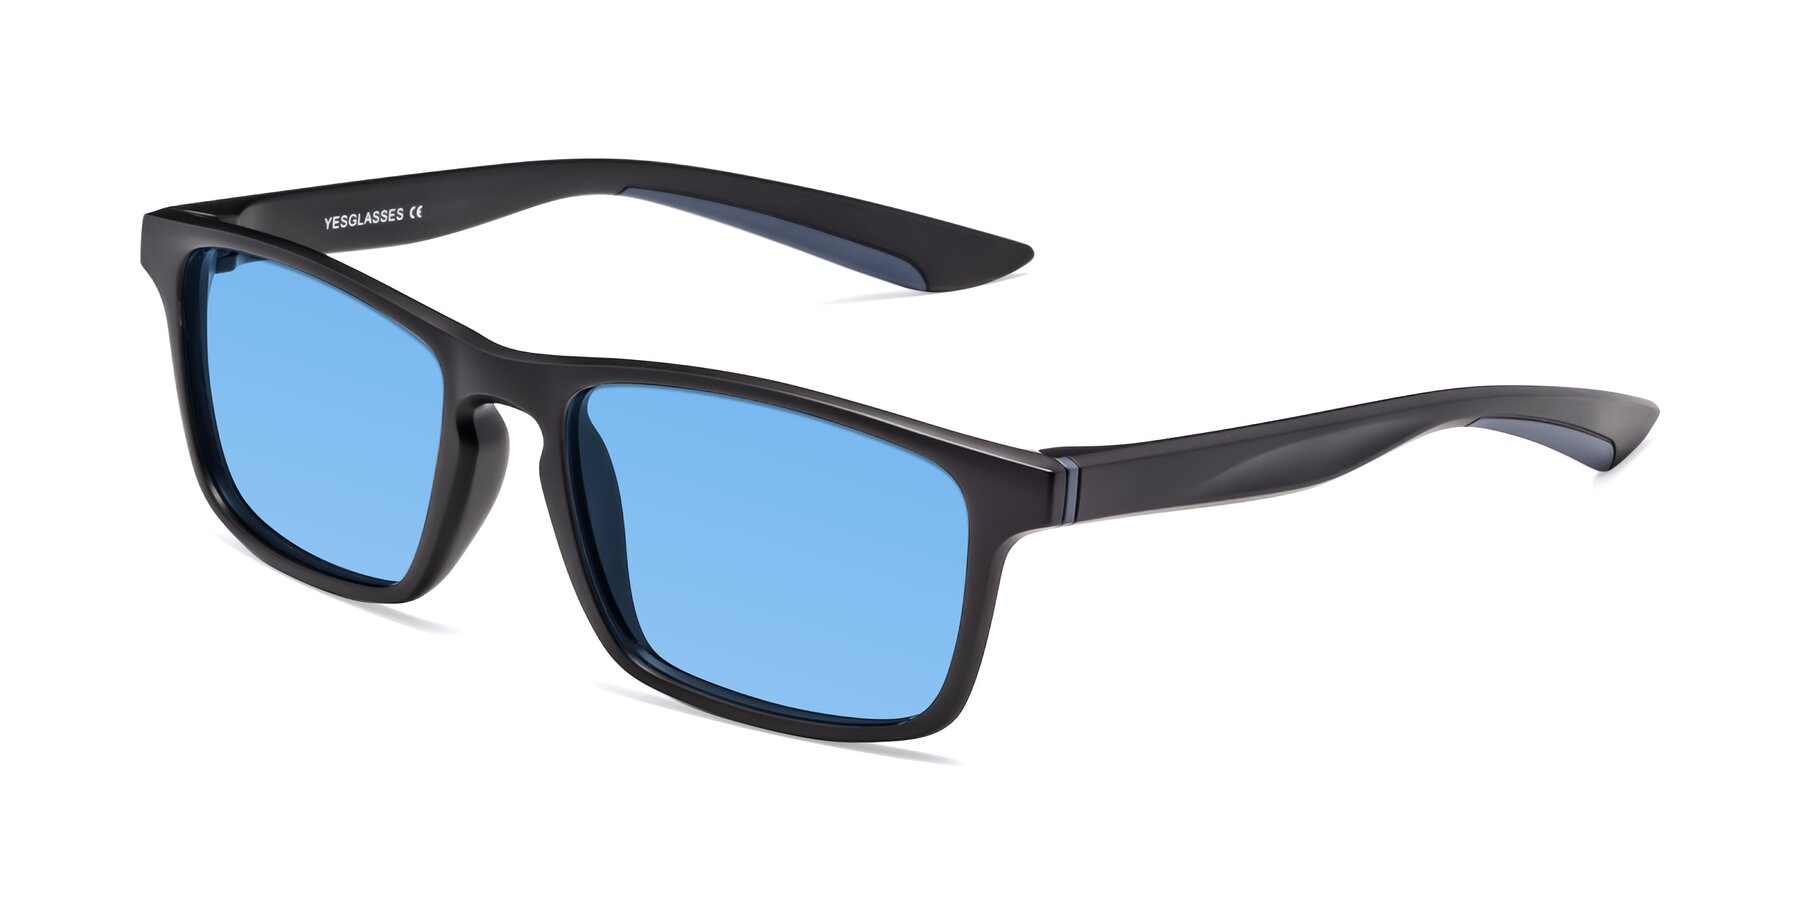 Angle of Passion in Matte Black-Blue with Medium Blue Tinted Lenses